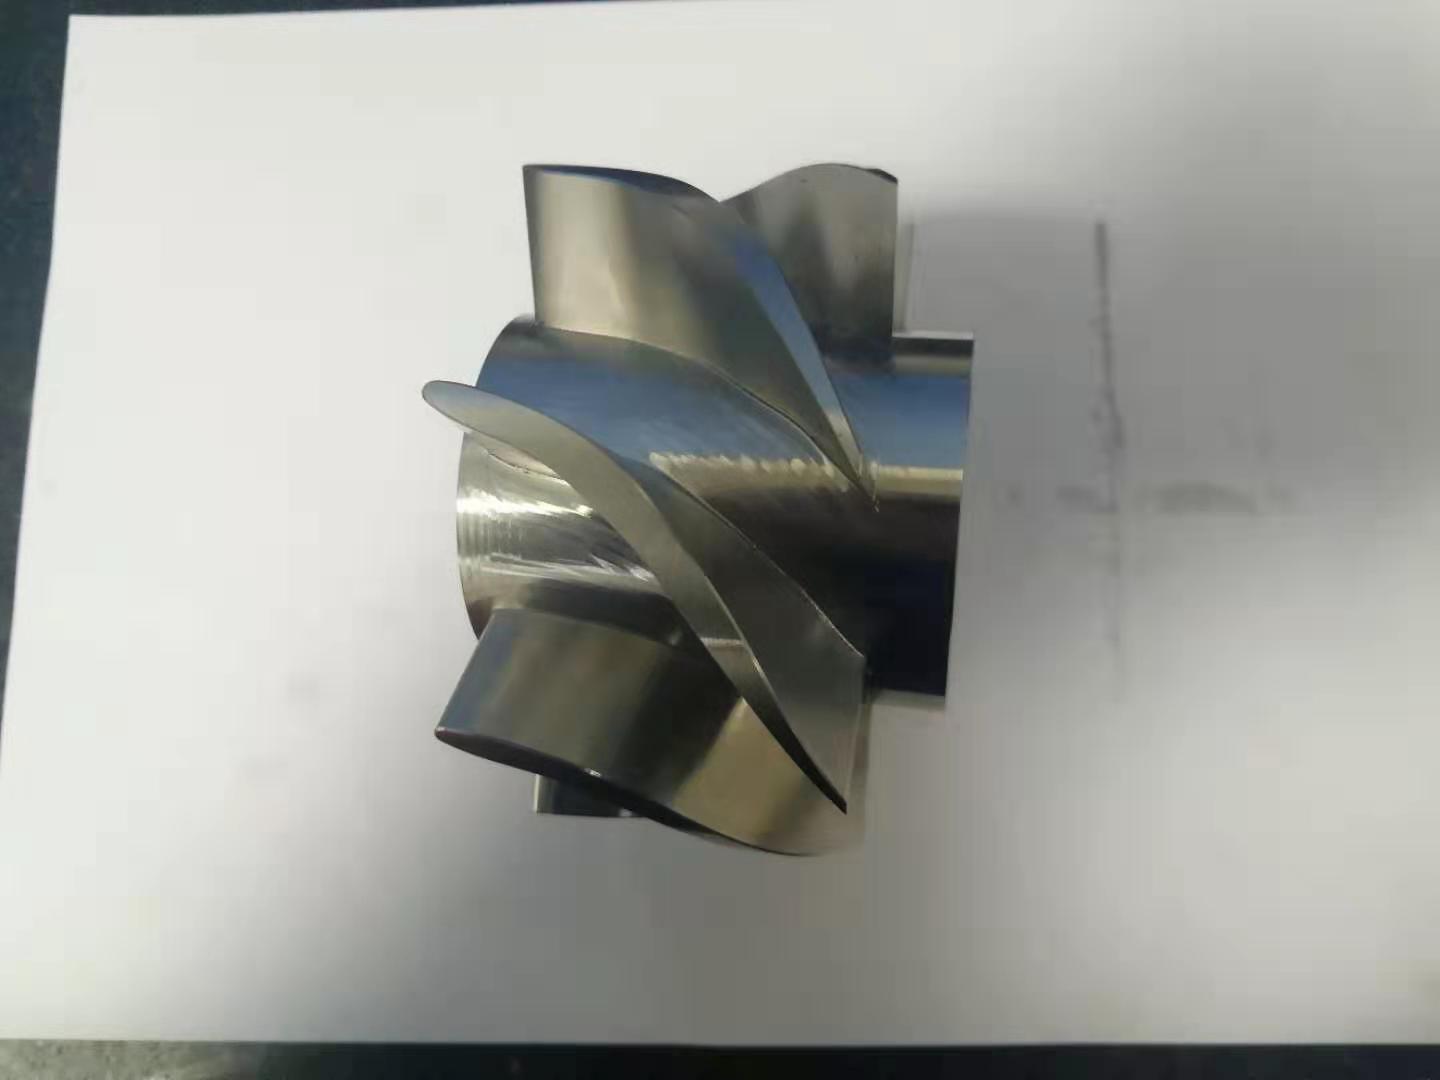 5 axis milling turbine wheel from Inconel 